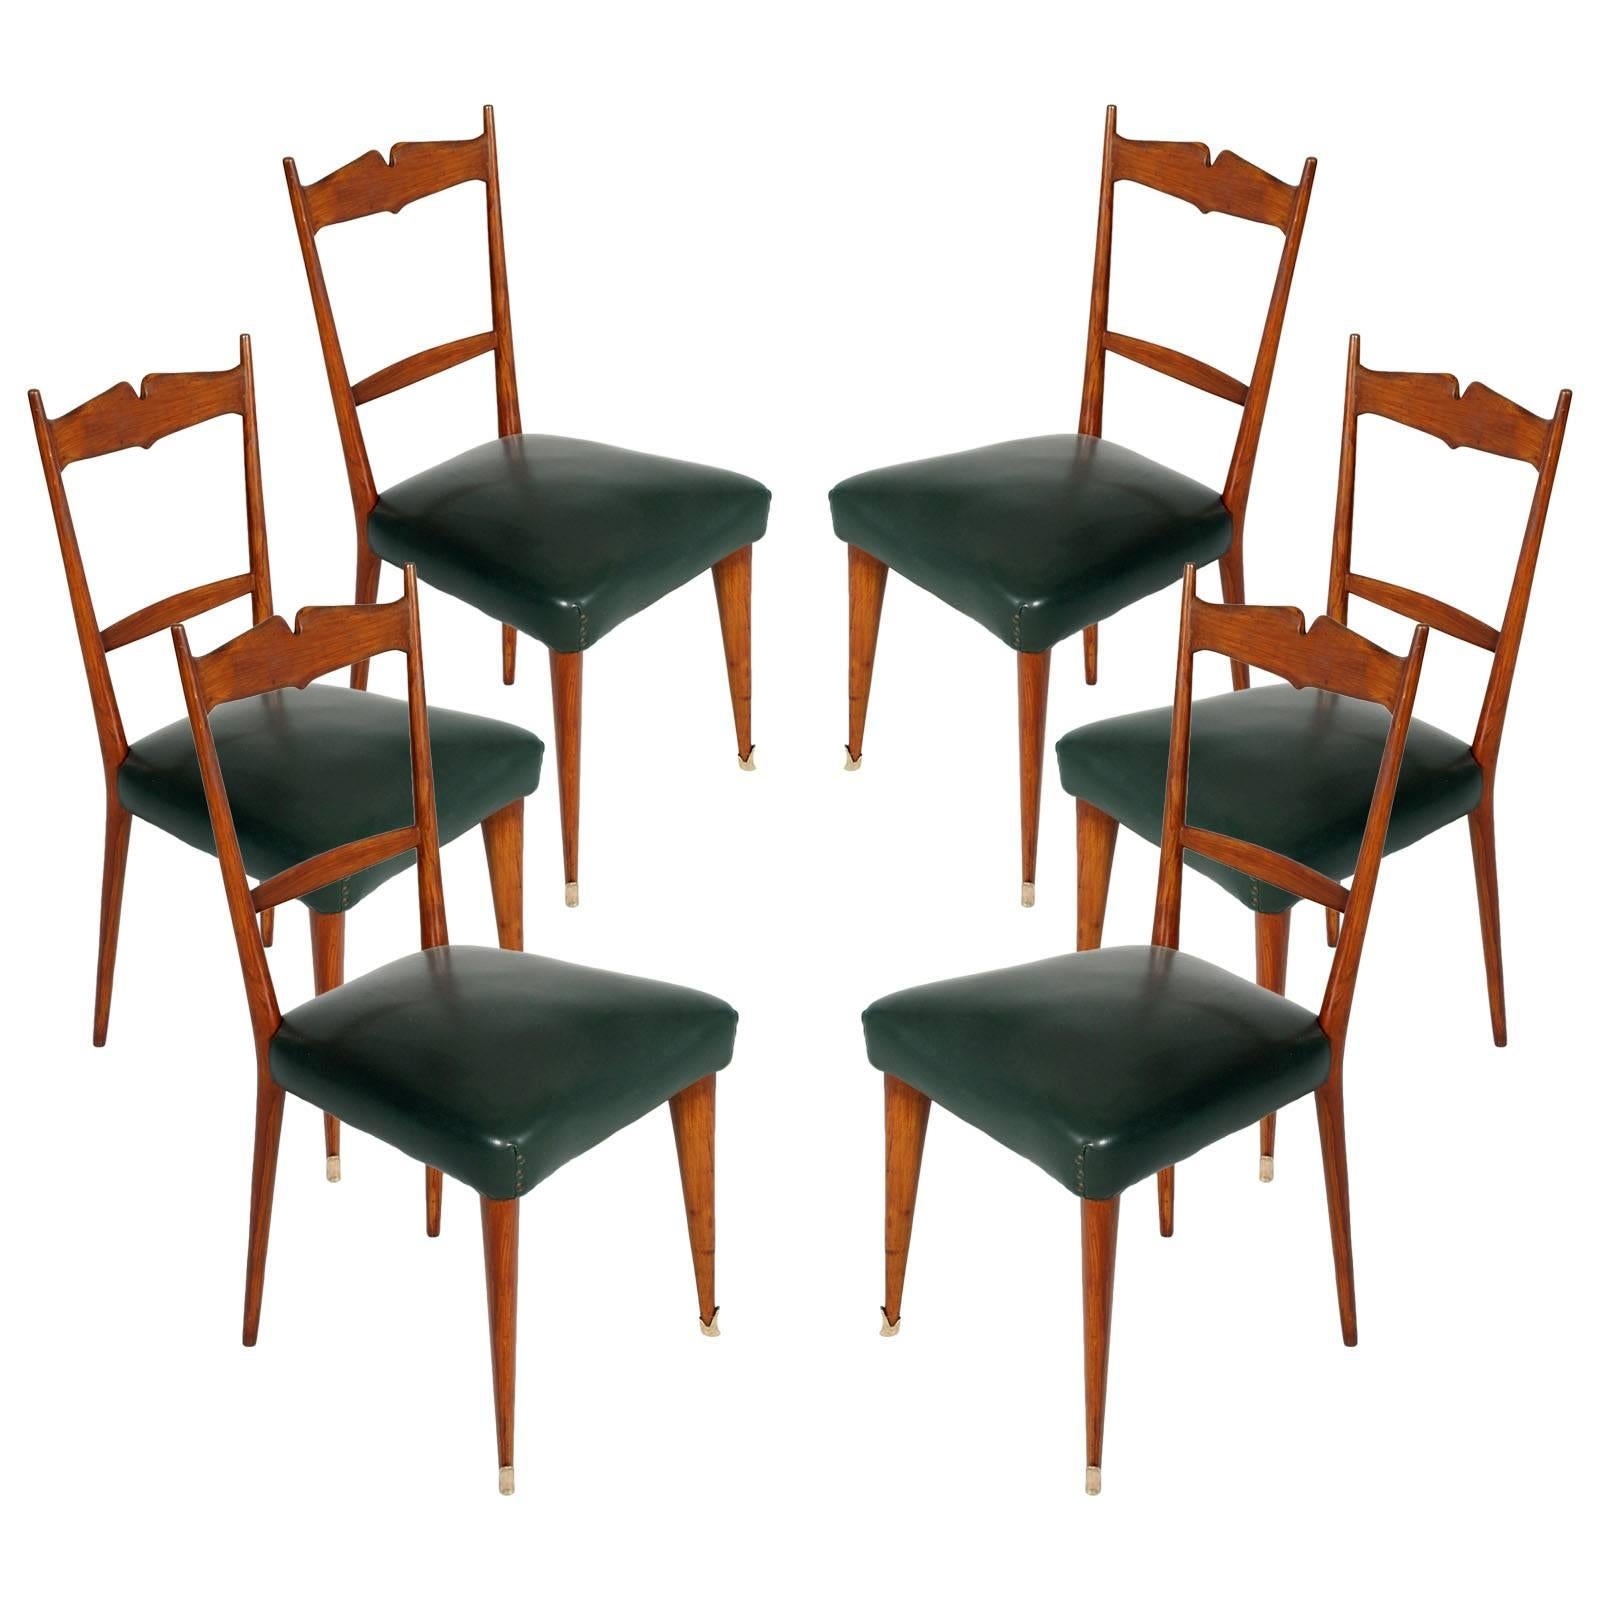 Italian Midcentury Six Chairs Ico and Luisa Parisi Attributed Cherrywood For Sale